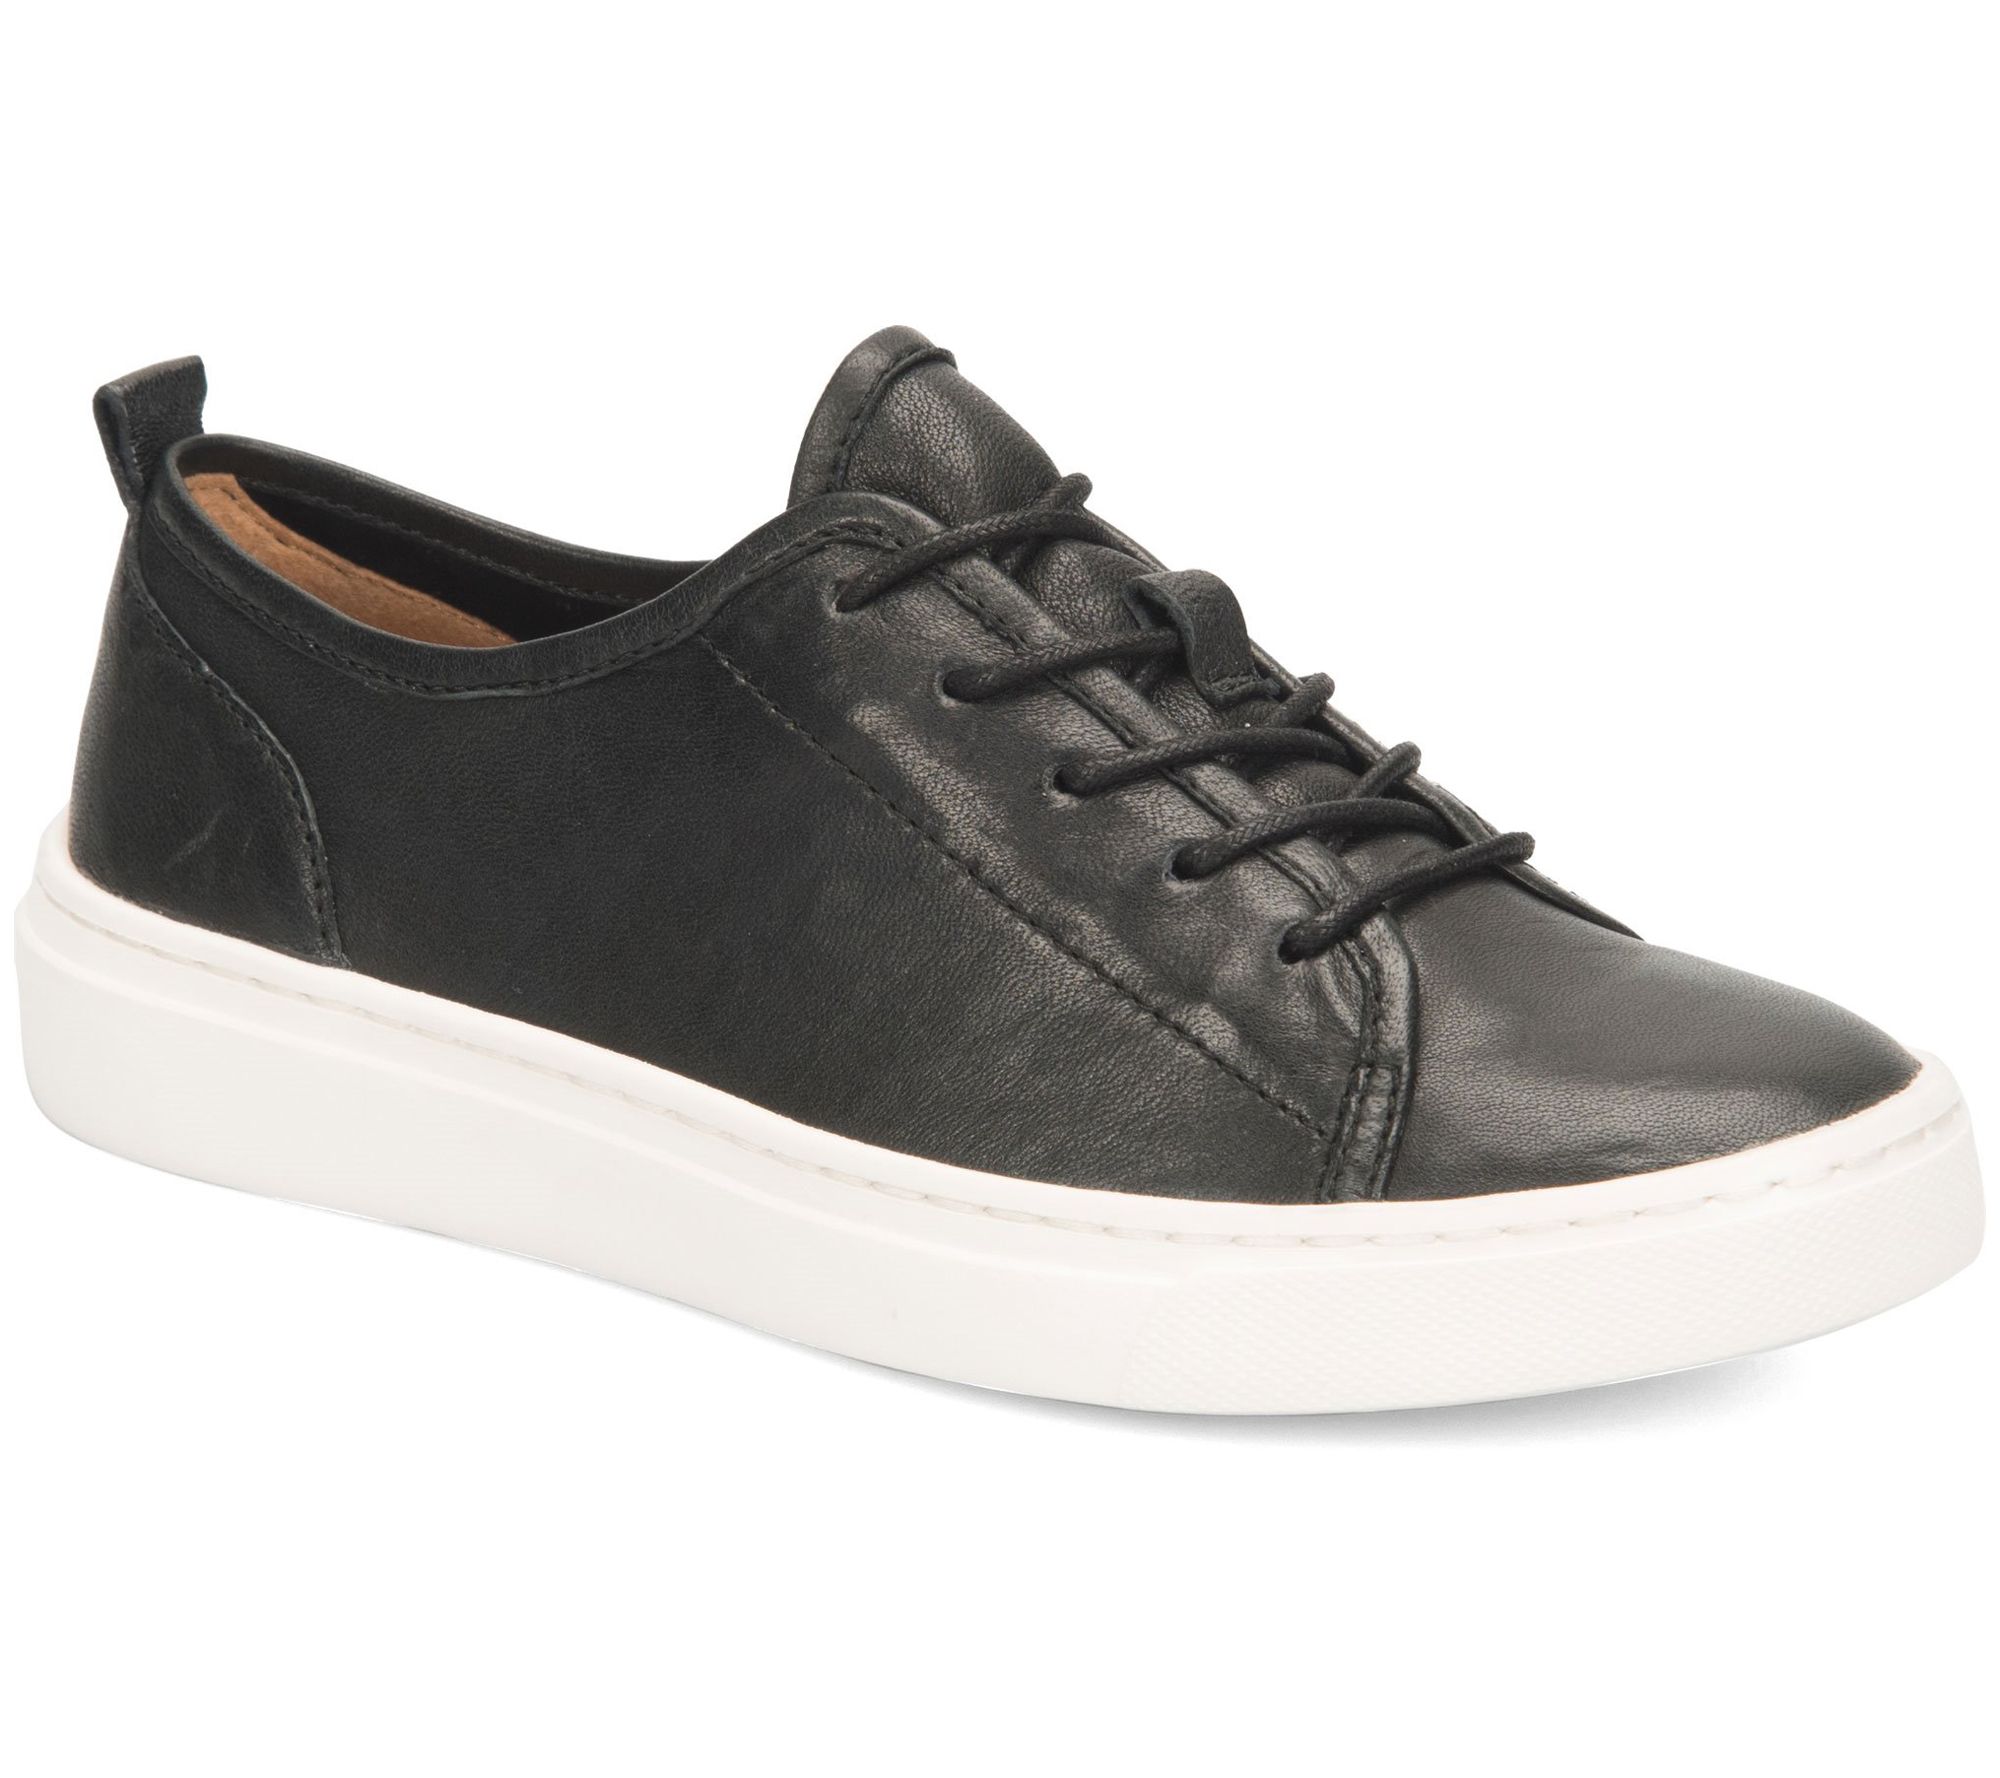 Comfortiva Unlined Lace-Up Leather Sneakers - Talen - QVC.com